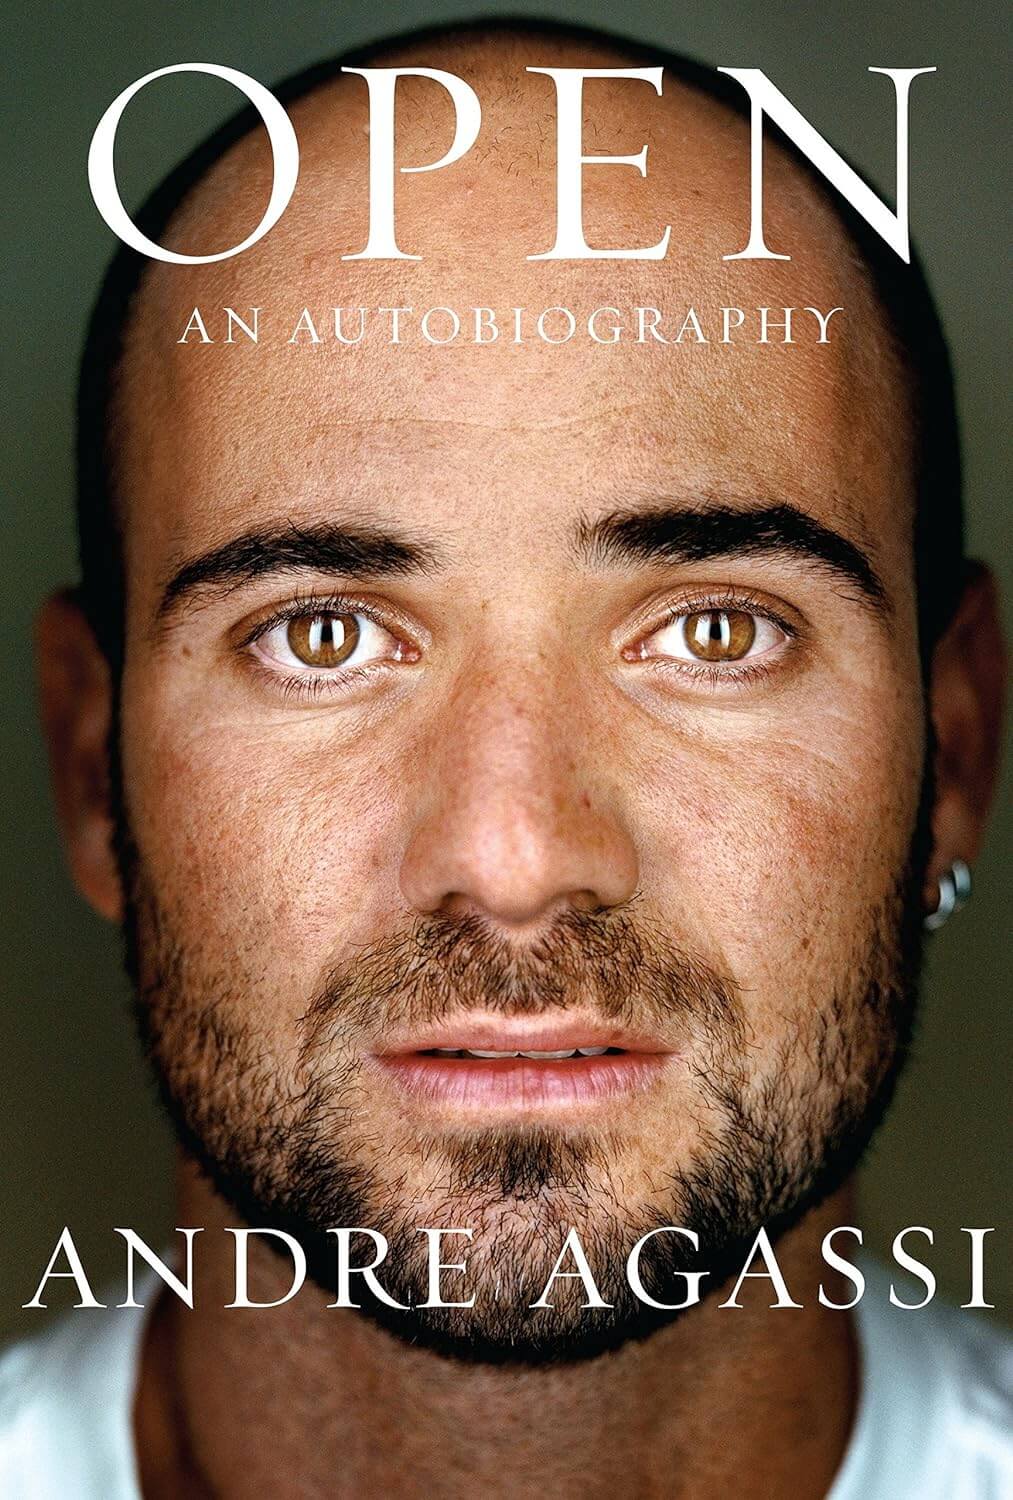 "Open: An Autobiography" by Andre Agassi